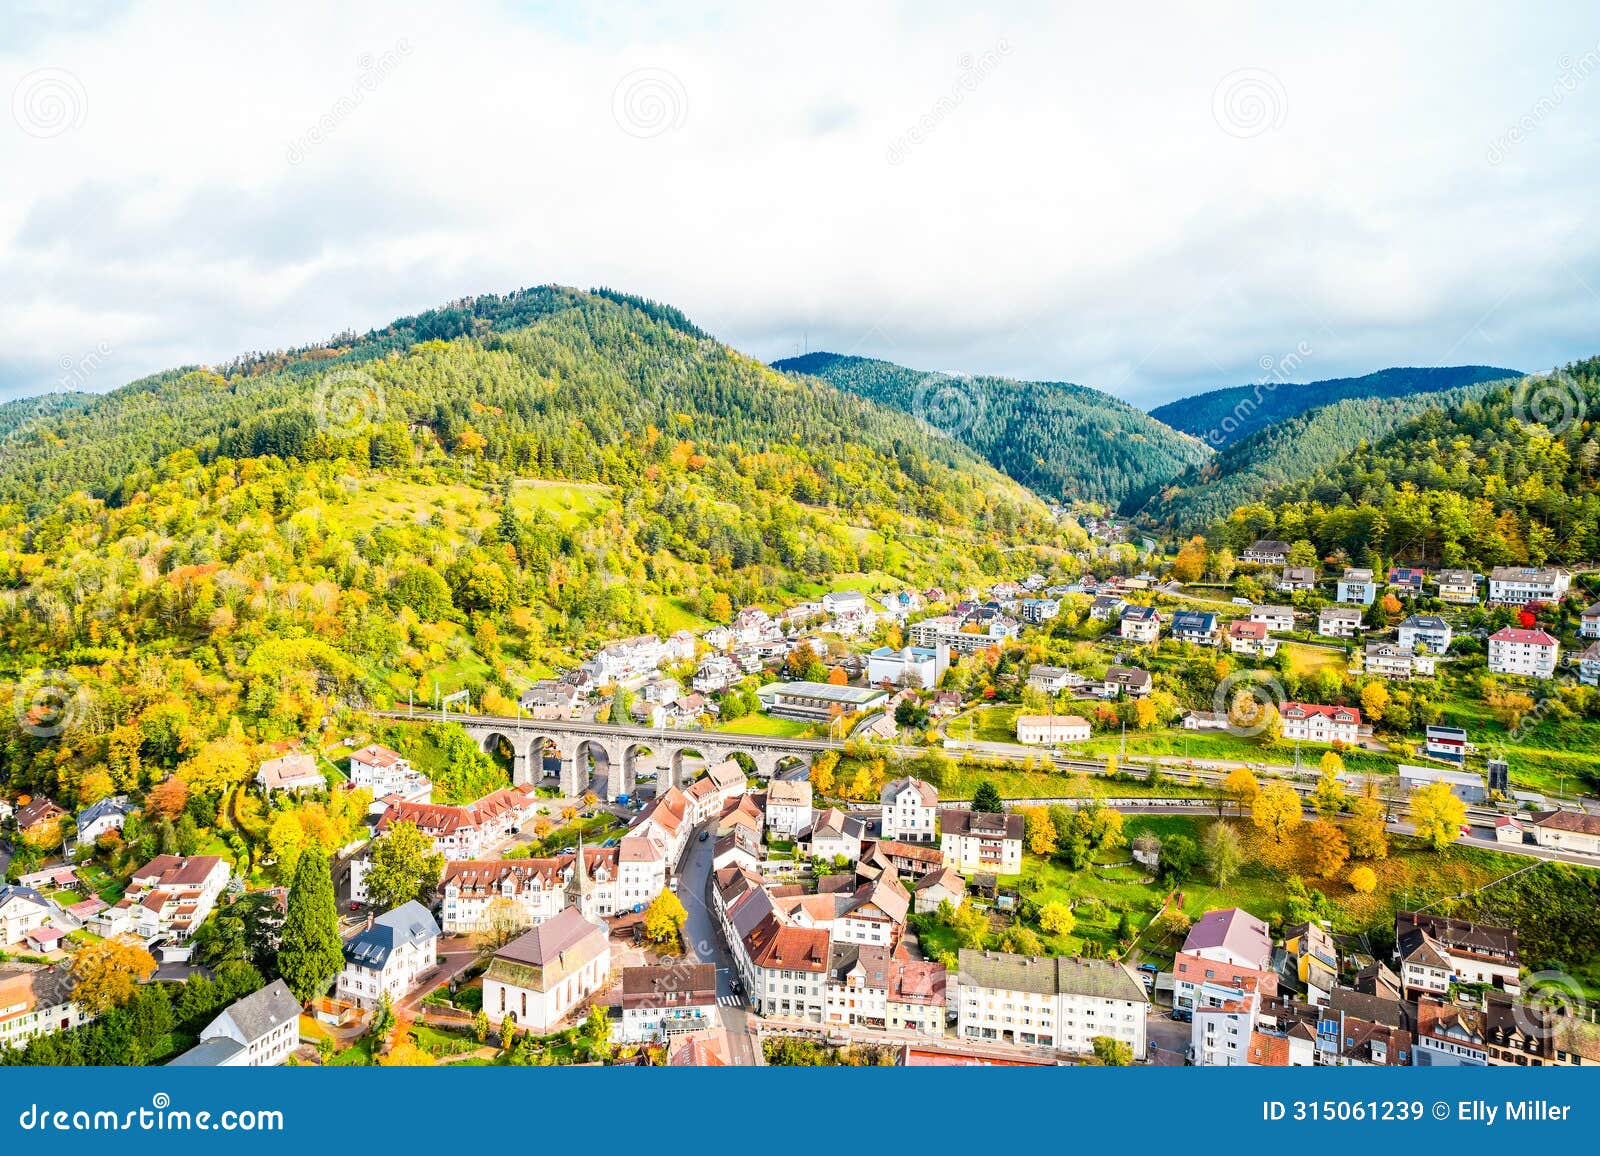 view of the town of hornberg in the black forest. city in baden-wÃ¼rttemberg